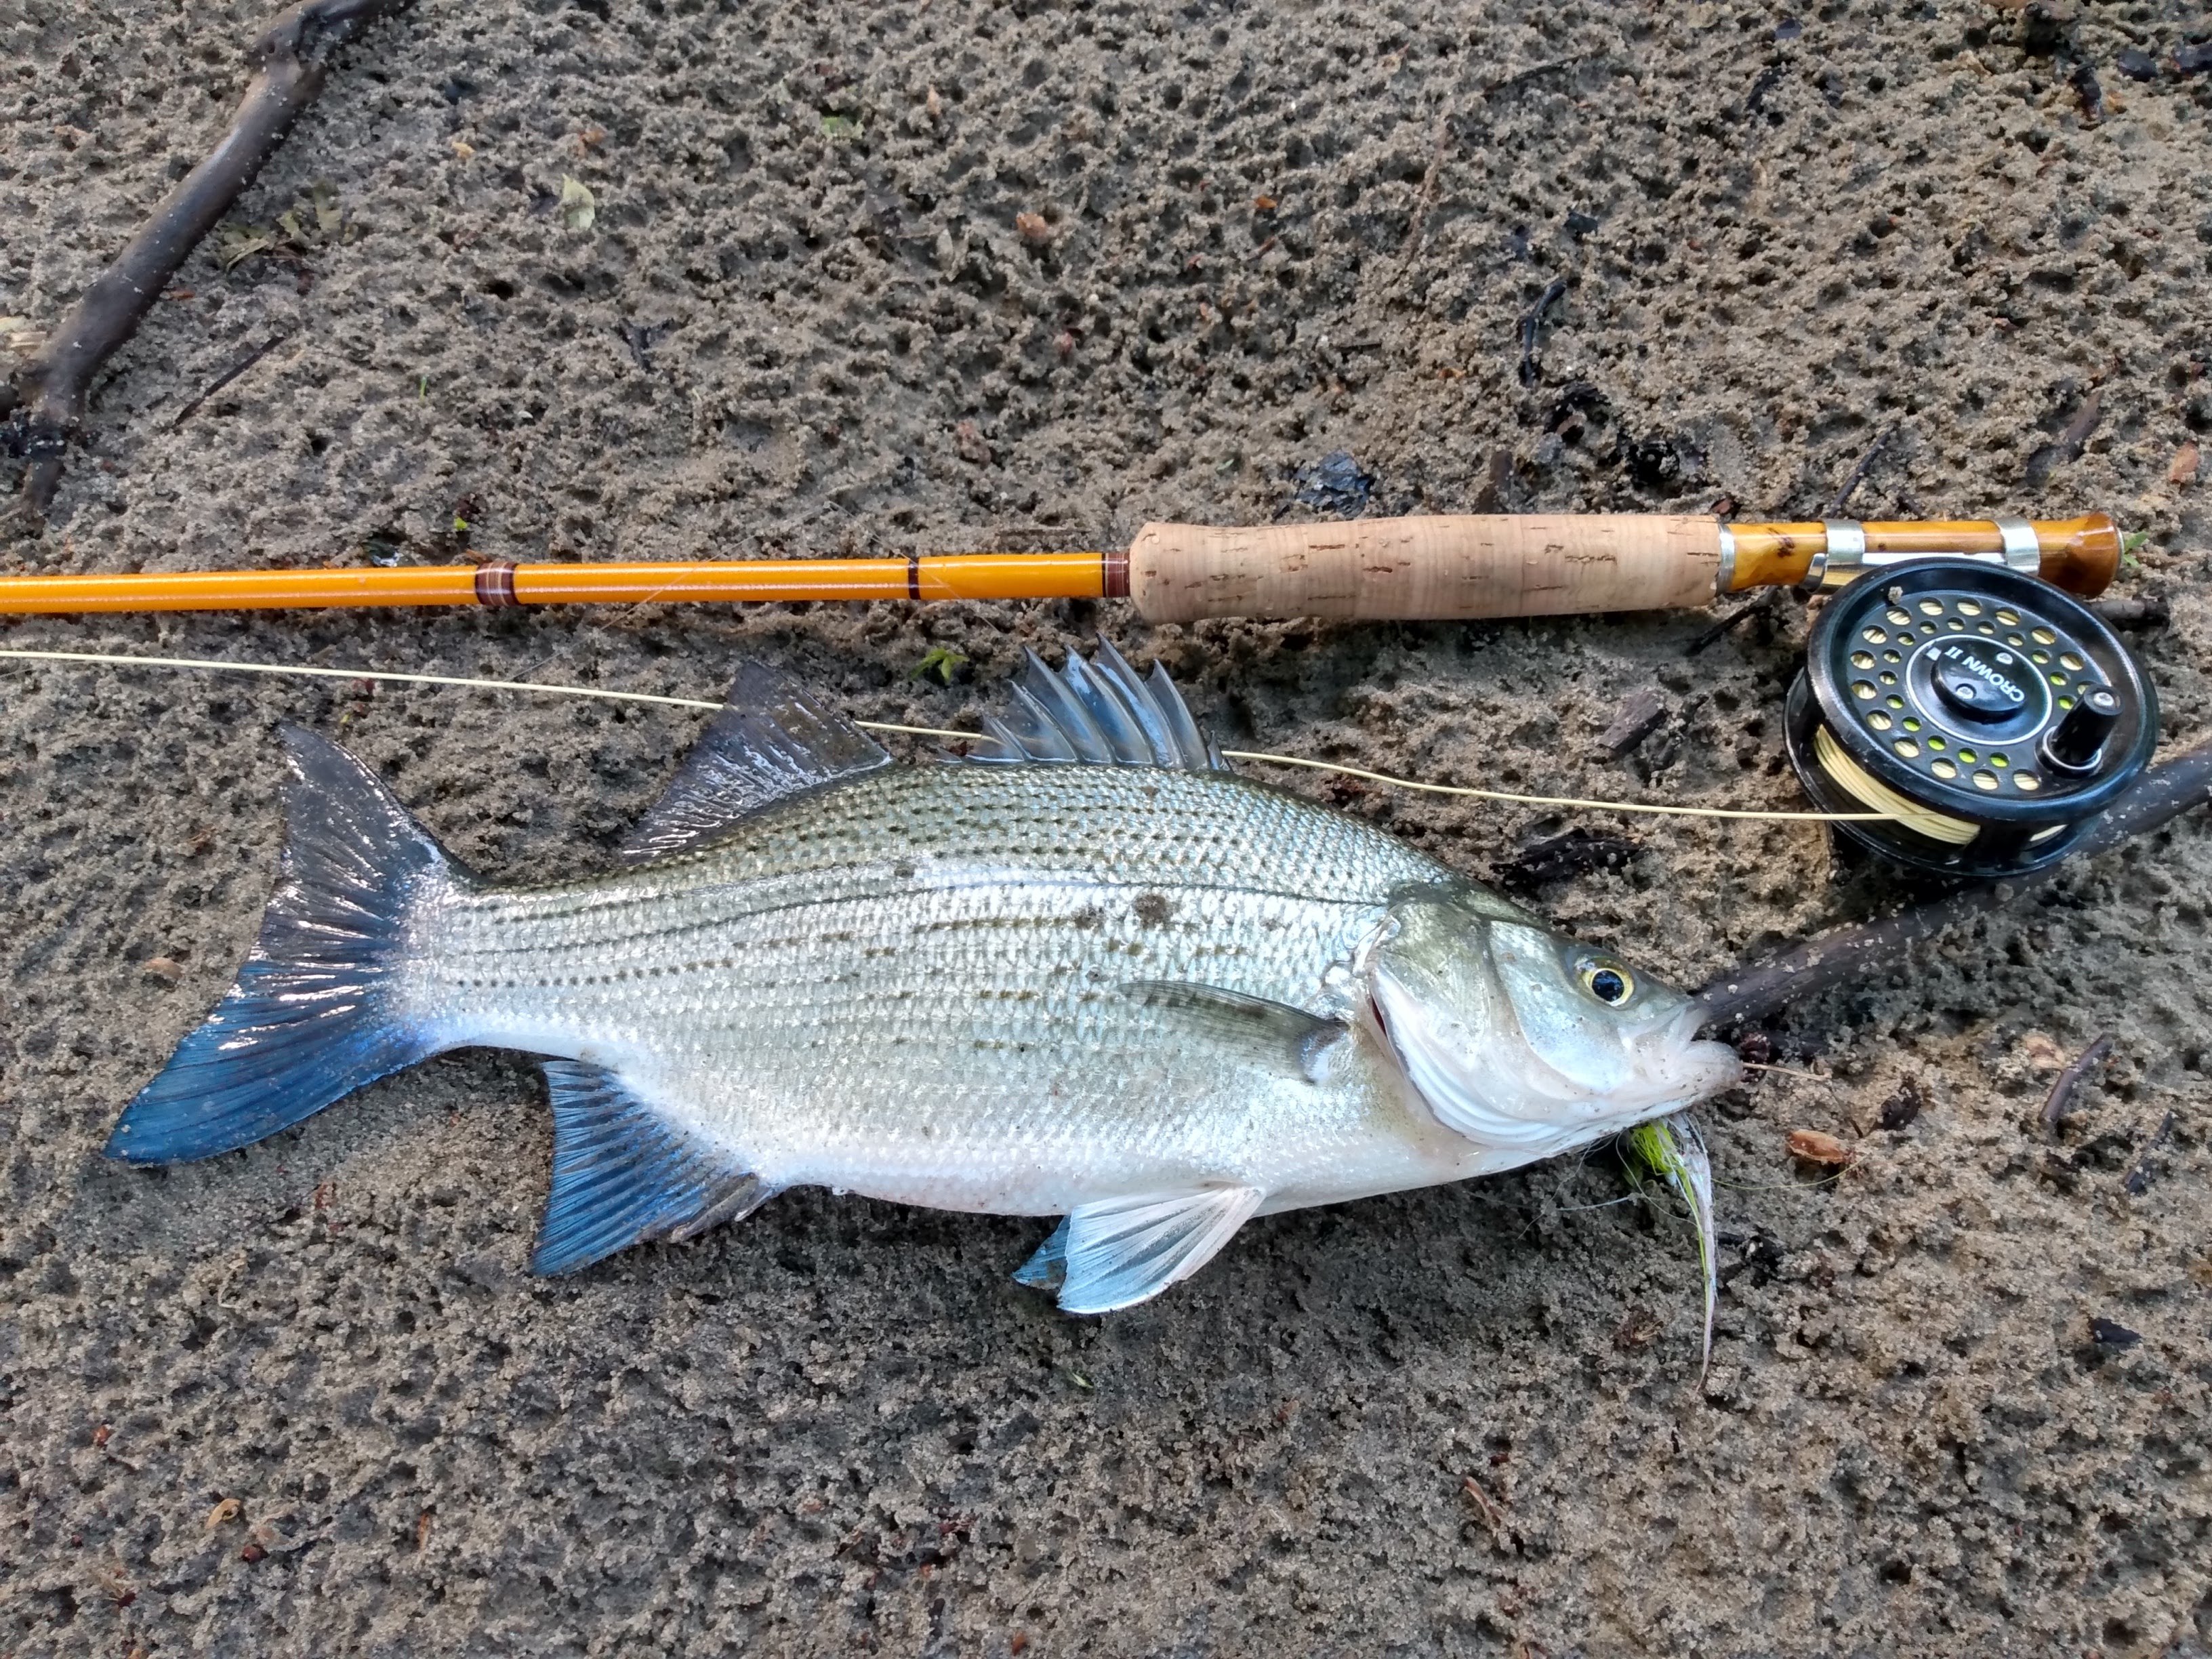 White Bass on the Fly, Fishing with Fiberglass Fly Rods